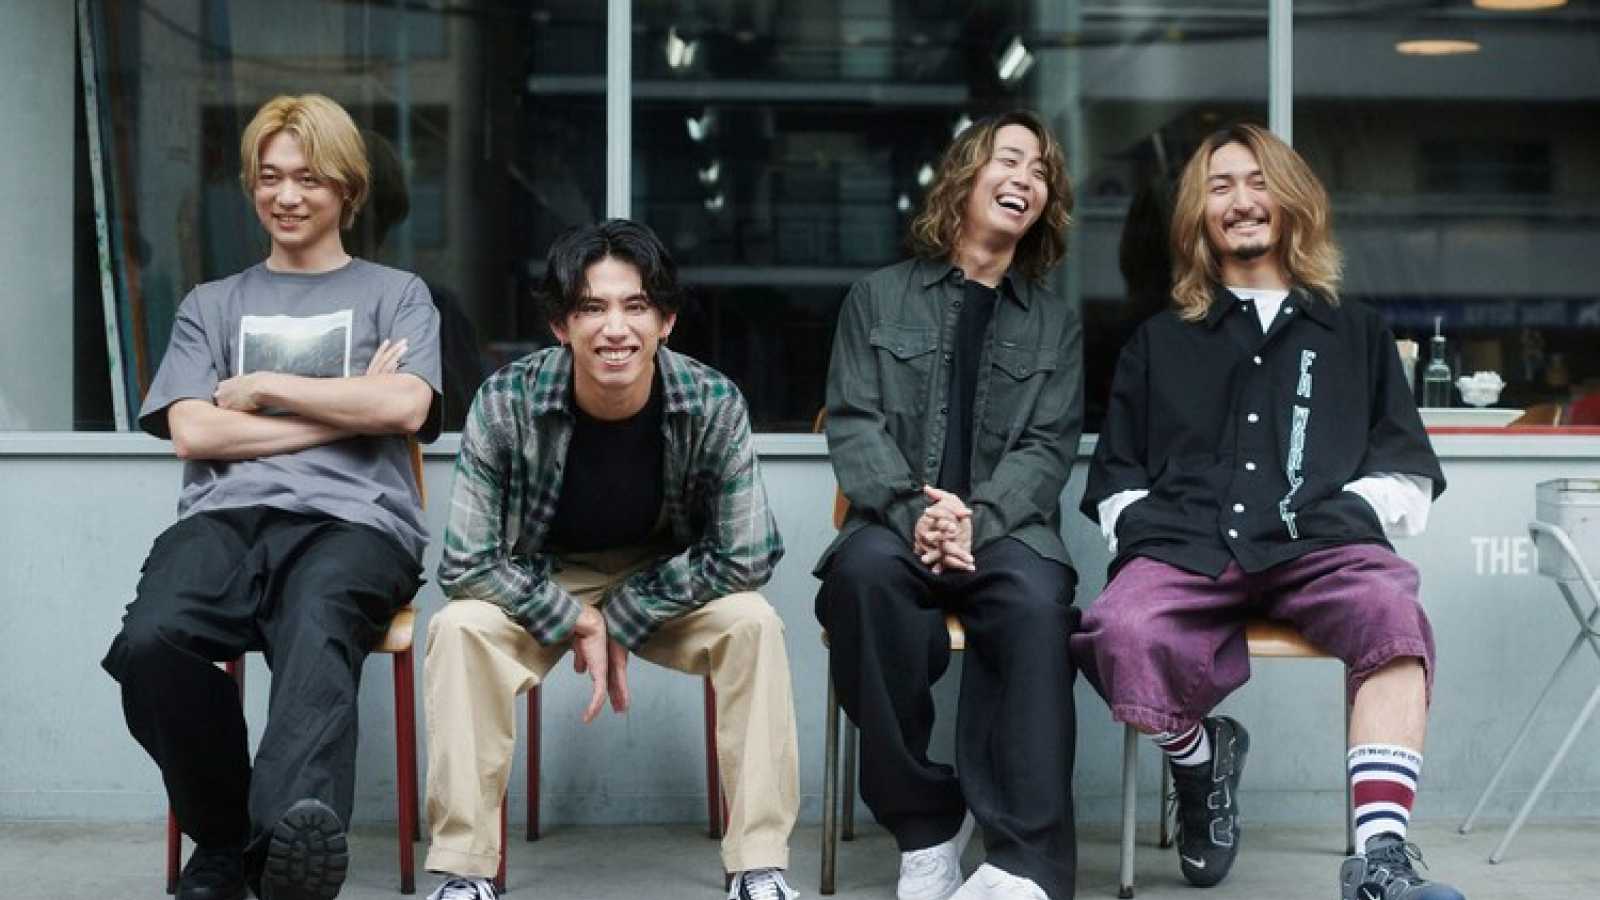 ONE OK ROCK Announce North America Tour and New Album © ONE OK ROCK. All rights reserved.